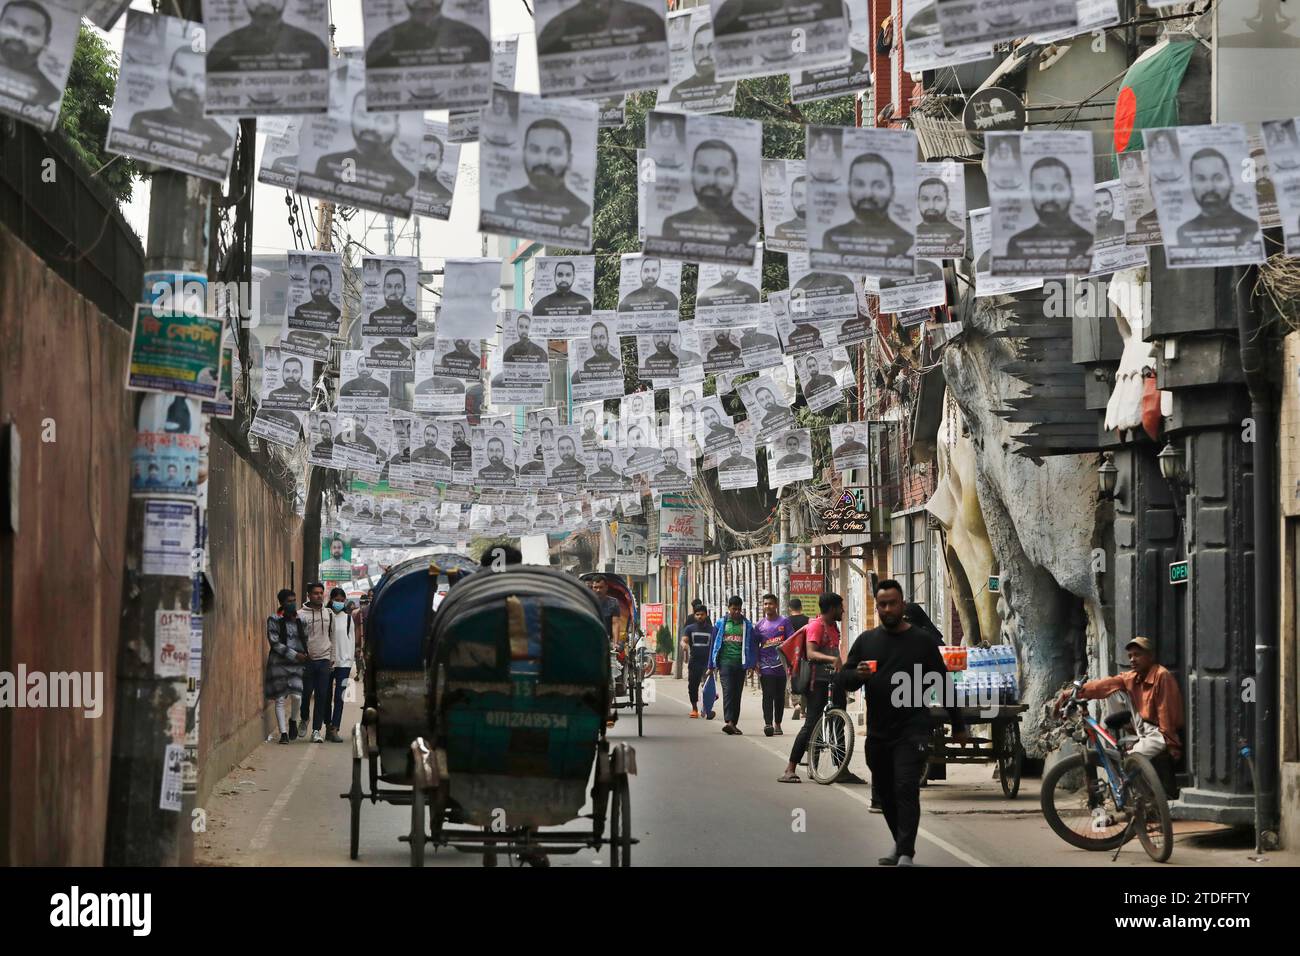 Dhaka, Bangladesh - December 18, 2023: The campaign for the National Parliament election has started in Bangladesh today. Posters have been put up in Stock Photo